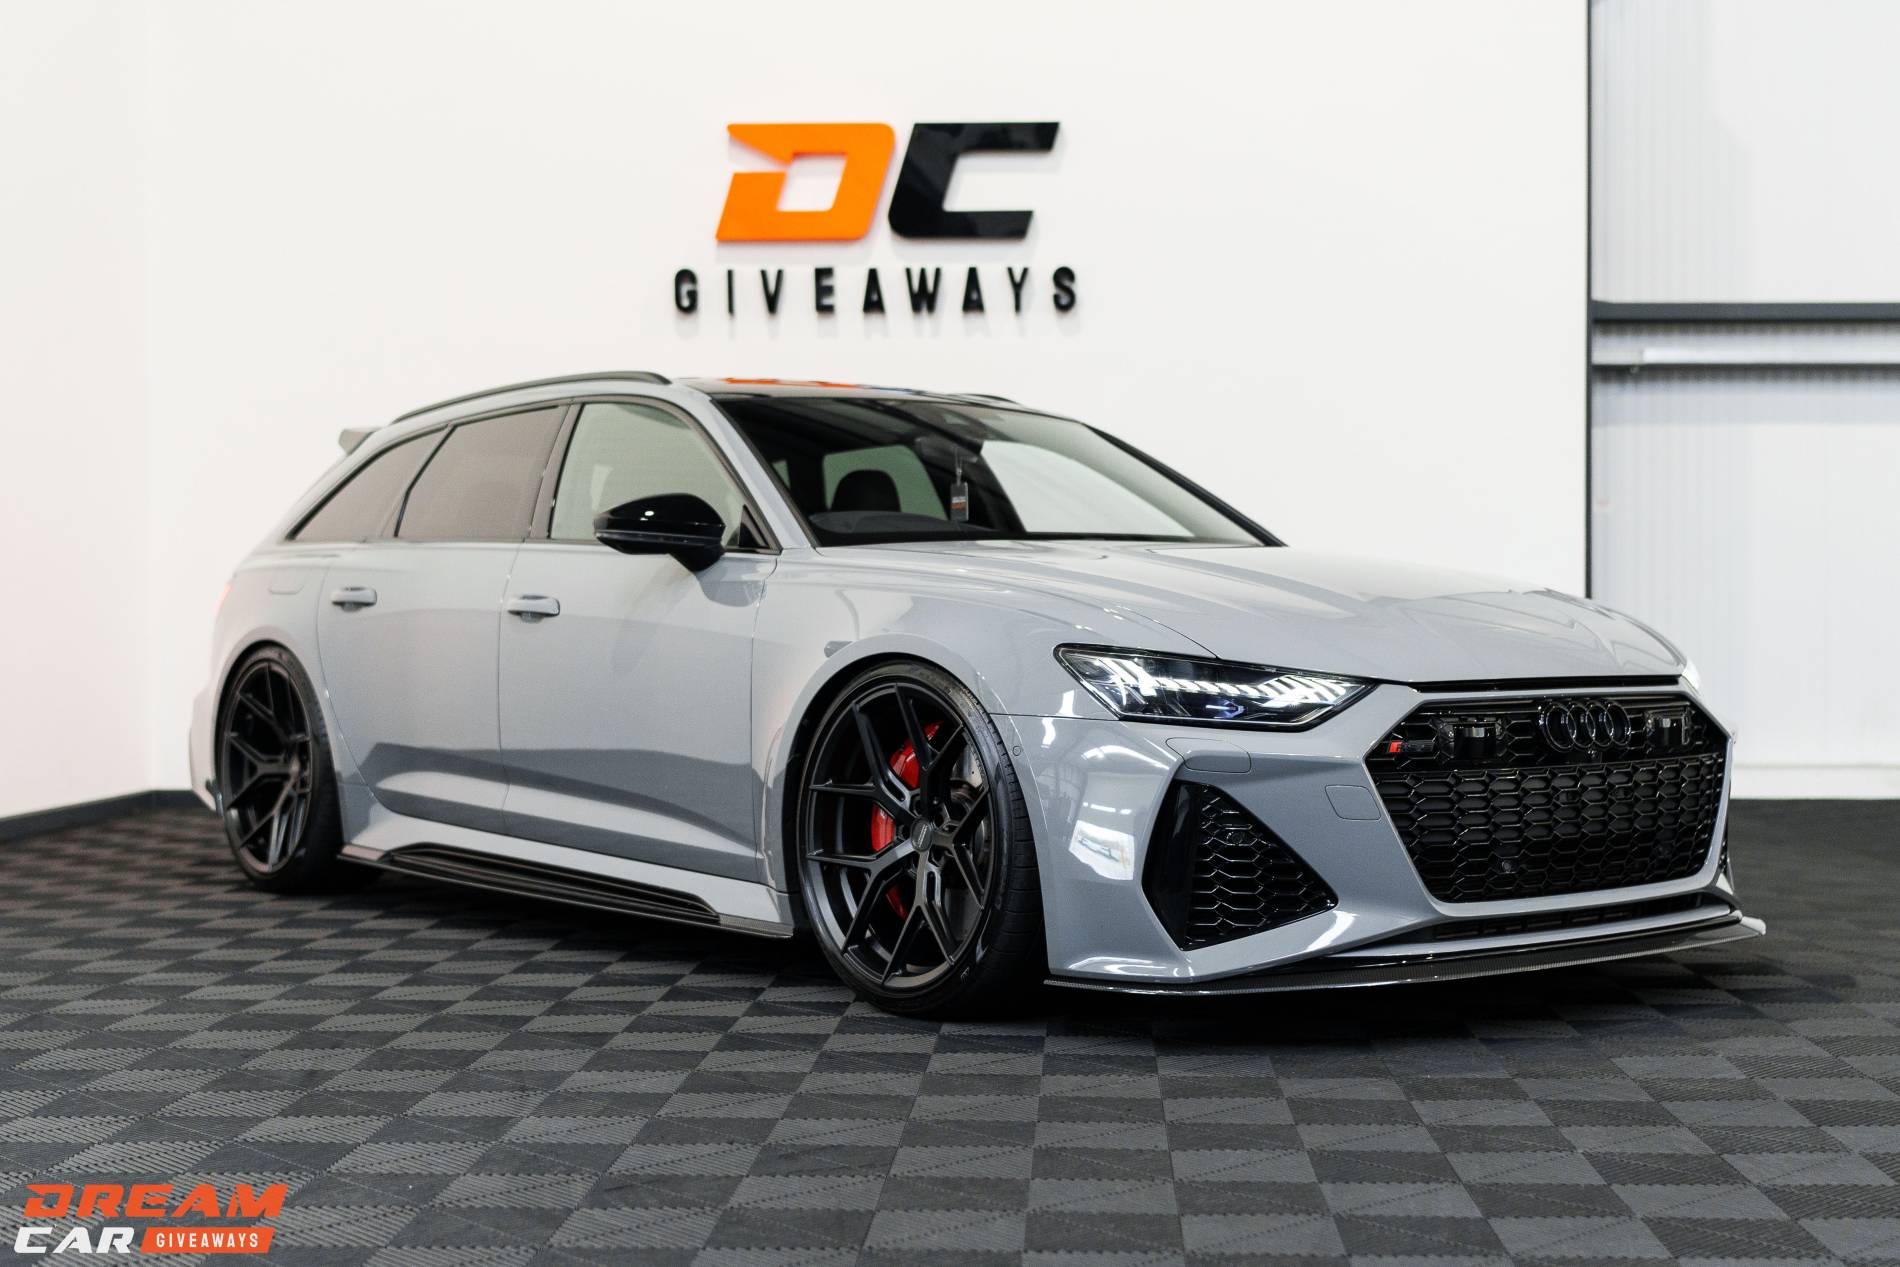 Win this 760HP Audi RS6 & £2,000 or £75,000 Tax Free